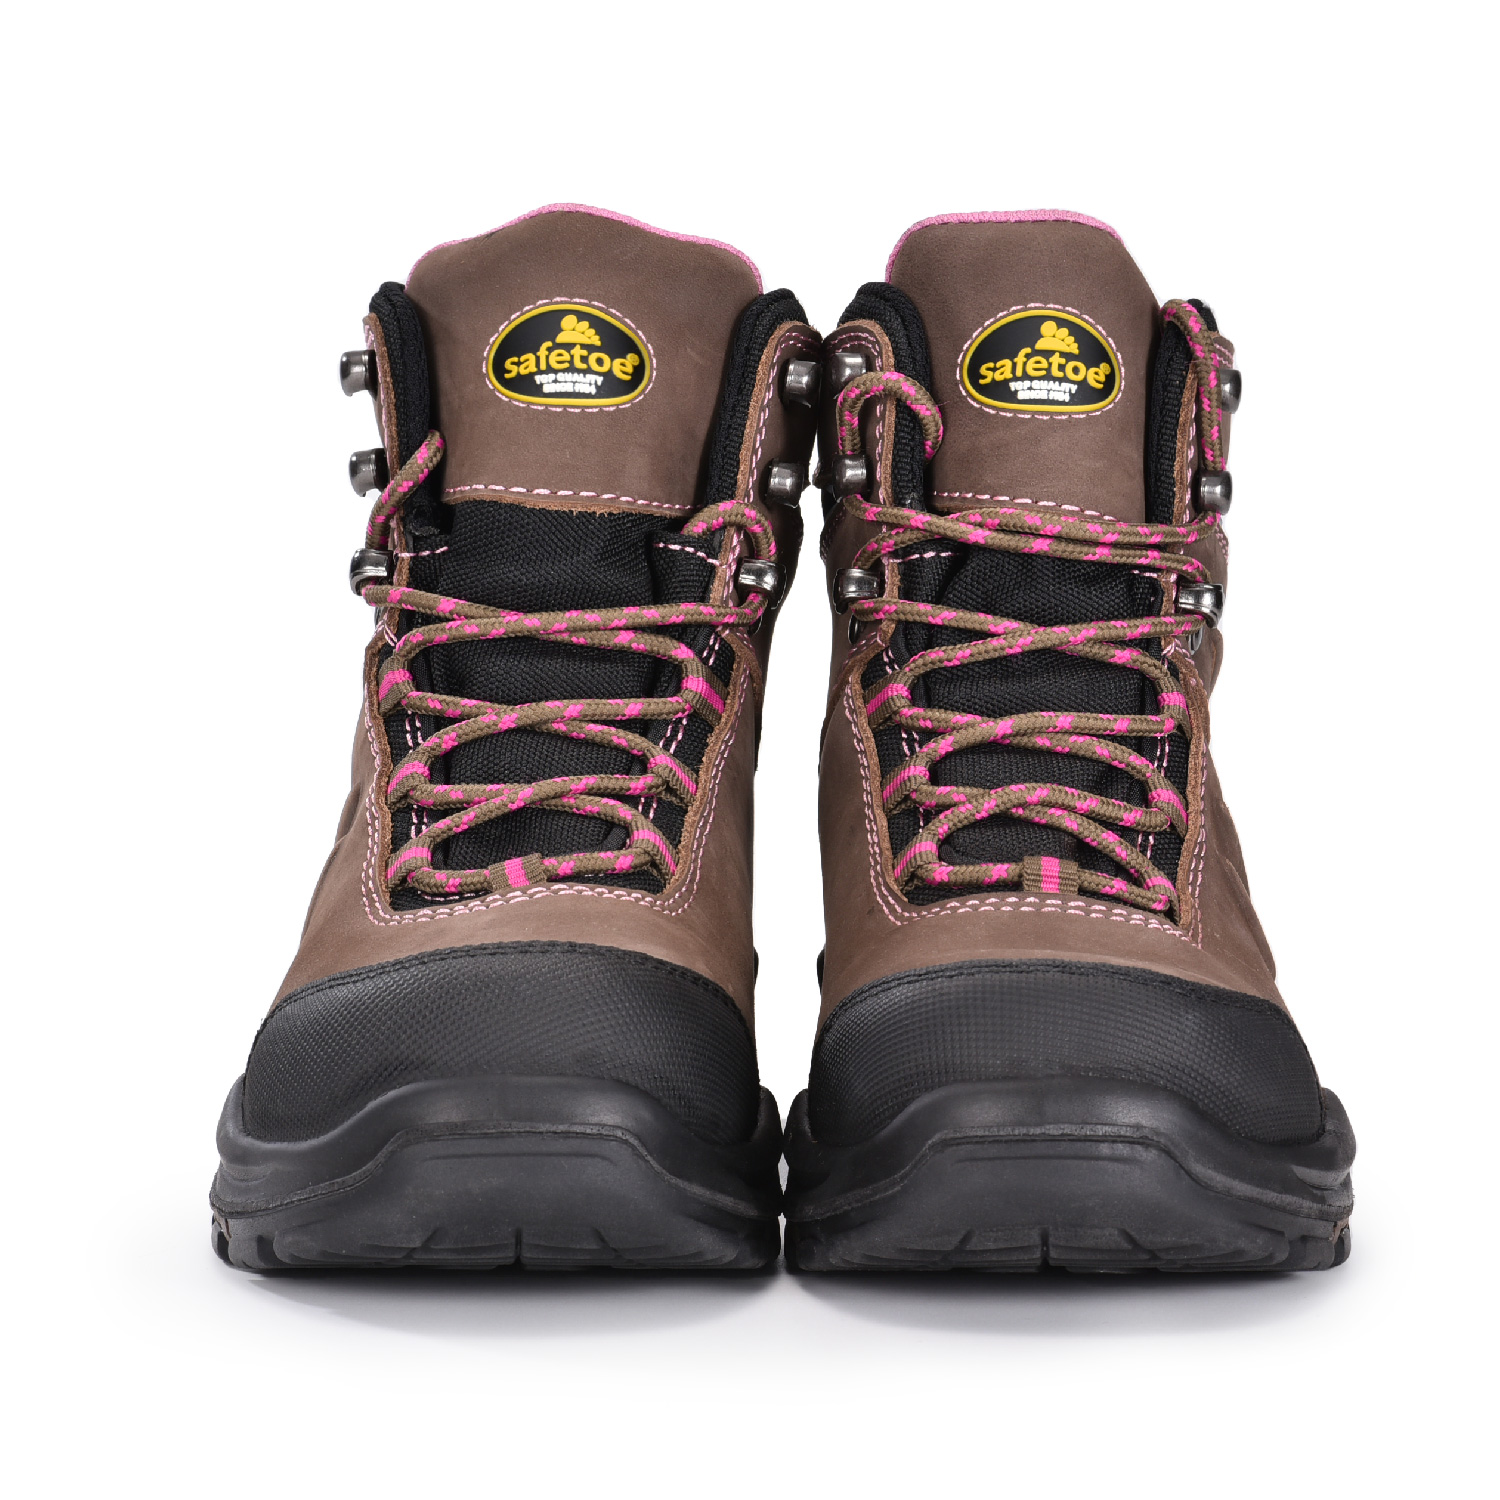 Waterproof & Slip Resistant Womens Work Boots with Composite Toe M-8553